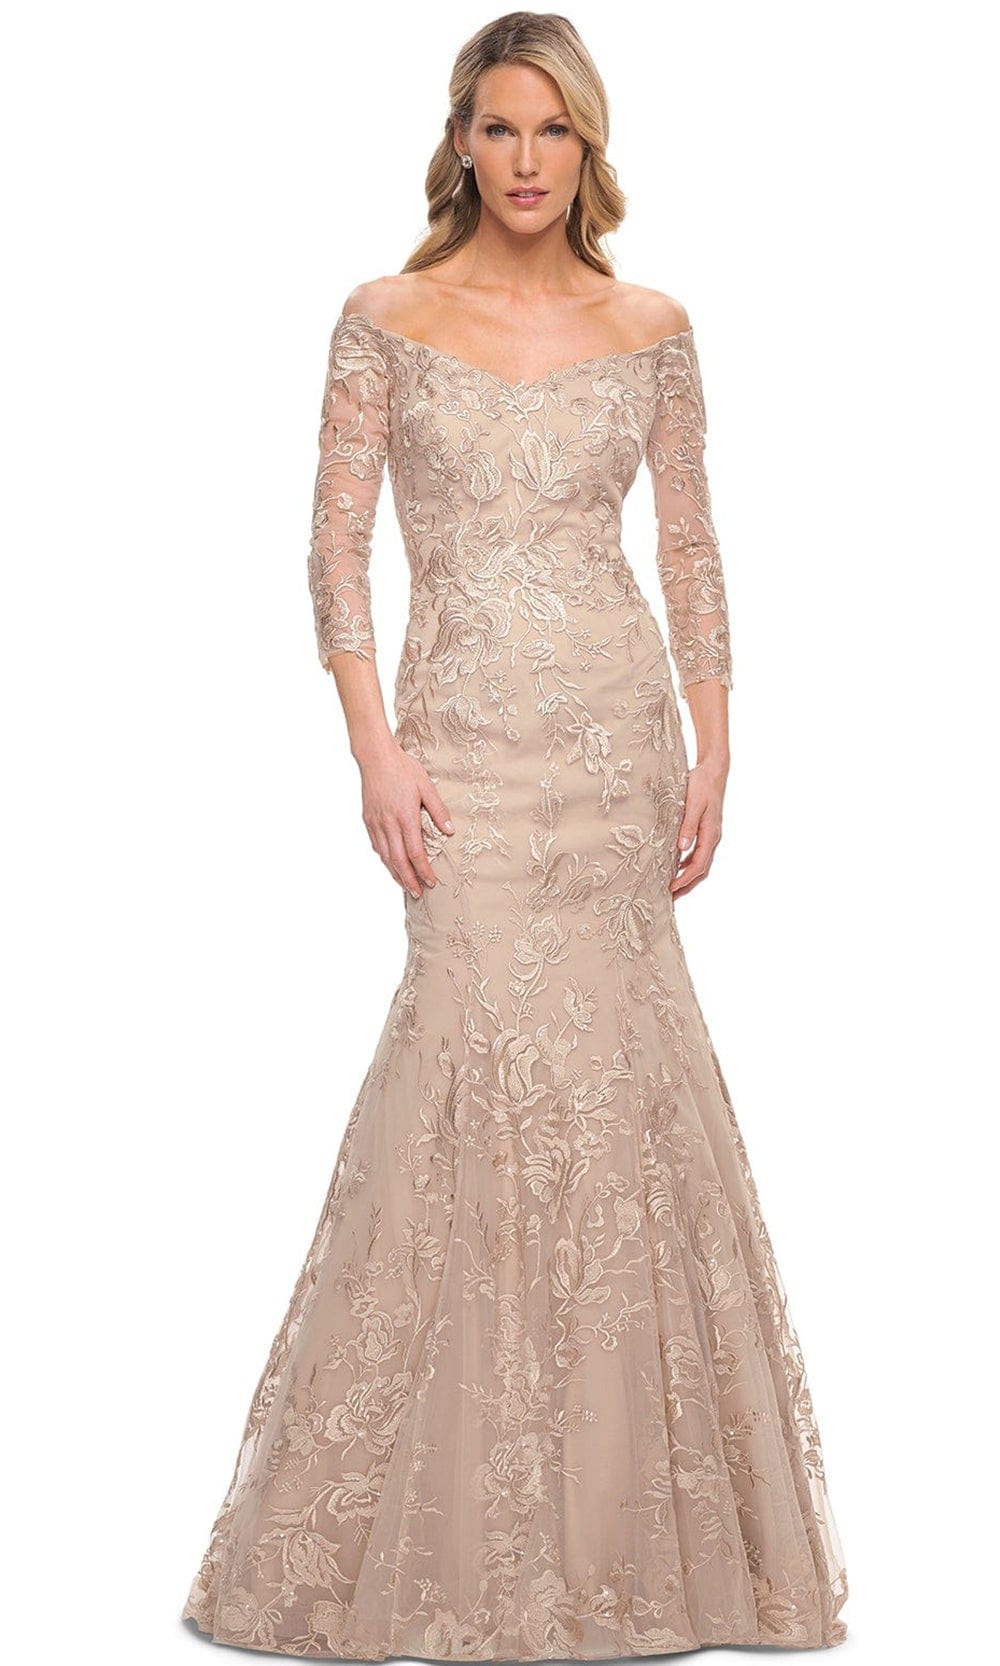 La Femme 30164 - Embroidered Mermaid Dress Mother of the Bride Dresses 4 / Champagne